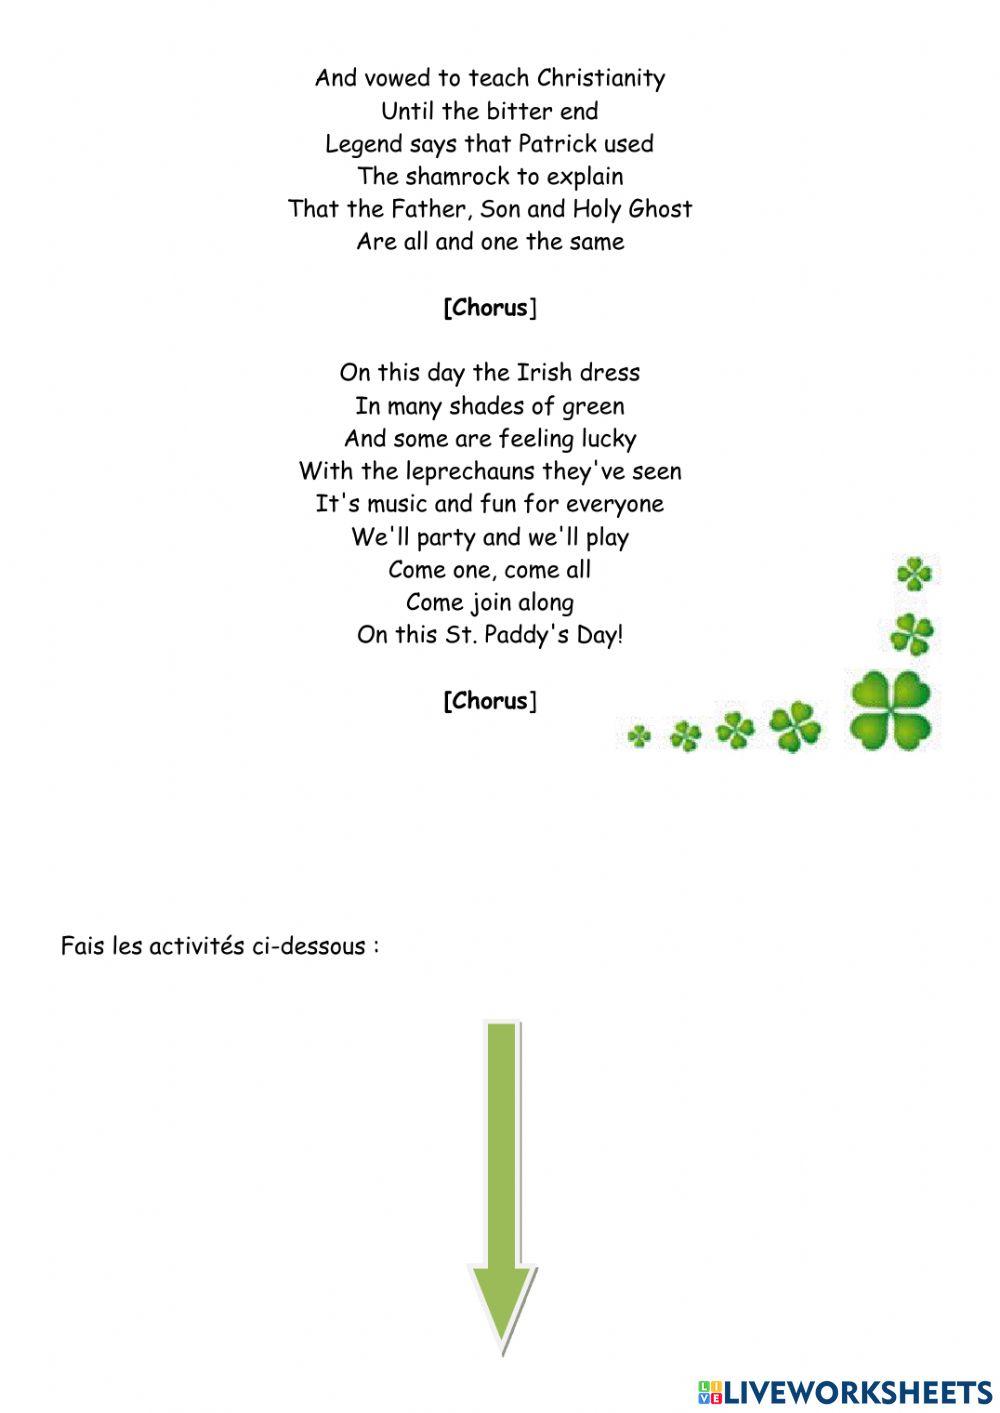 CE Saint Patrick's Day song